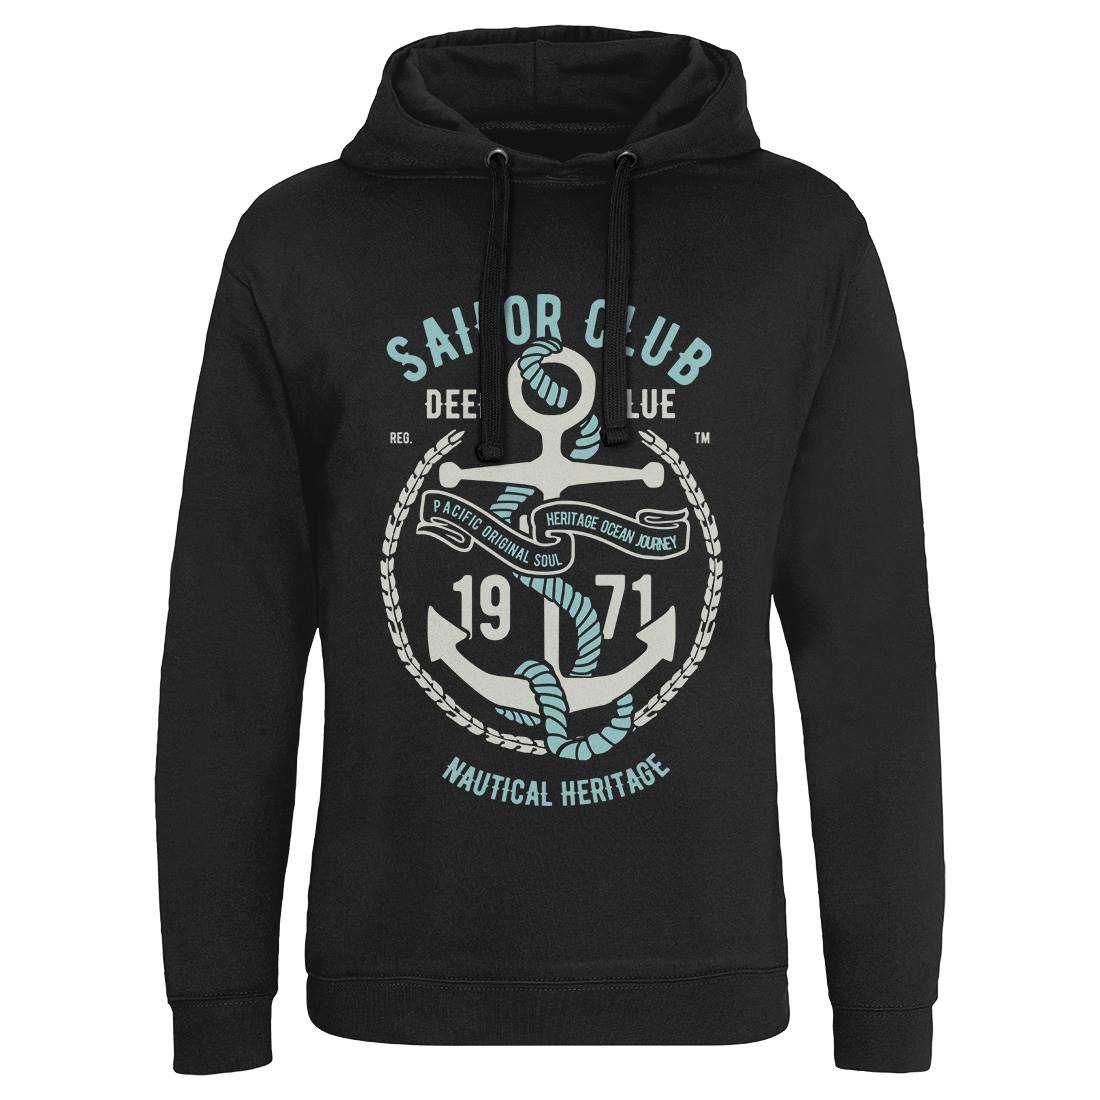 Sailor Club Mens Hoodie Without Pocket Navy B445